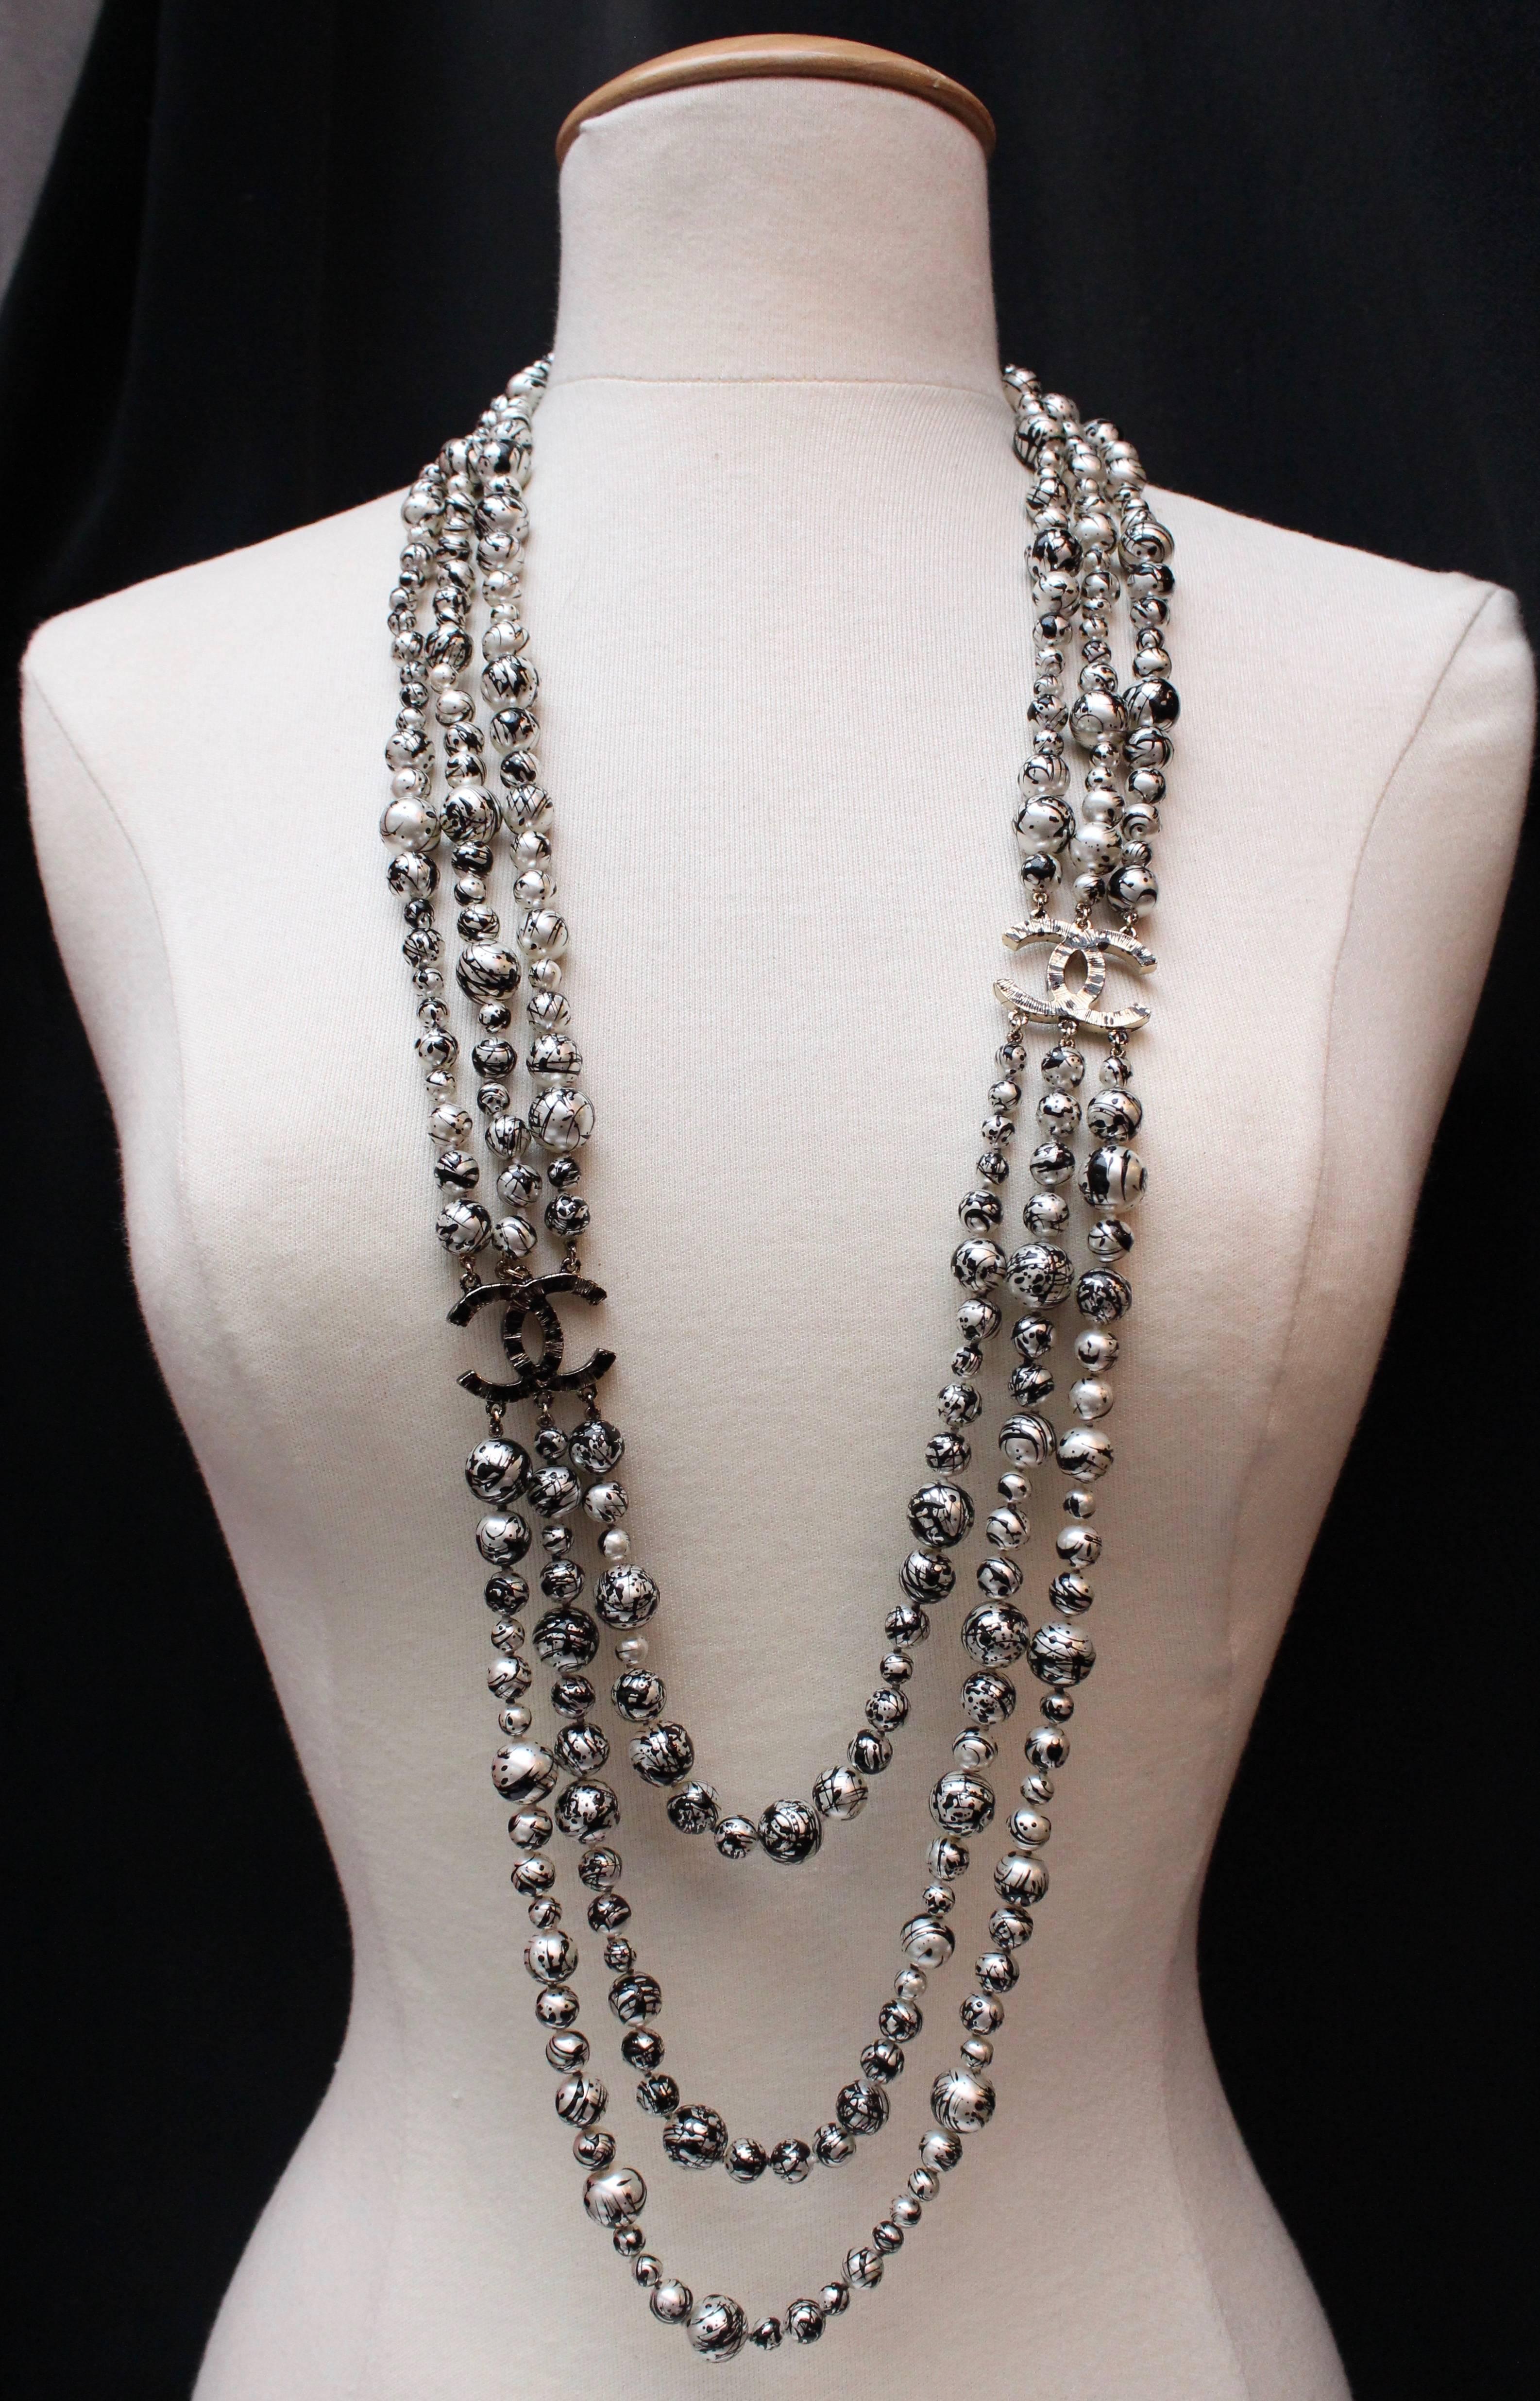 CHANEL (Made in France) Long sautoir necklace comprised of three strands of beads linked by two CC- shaped elements. The different size pearly beads are all decorated with black  random “brush stroke” touches. The necklace is embellished with two